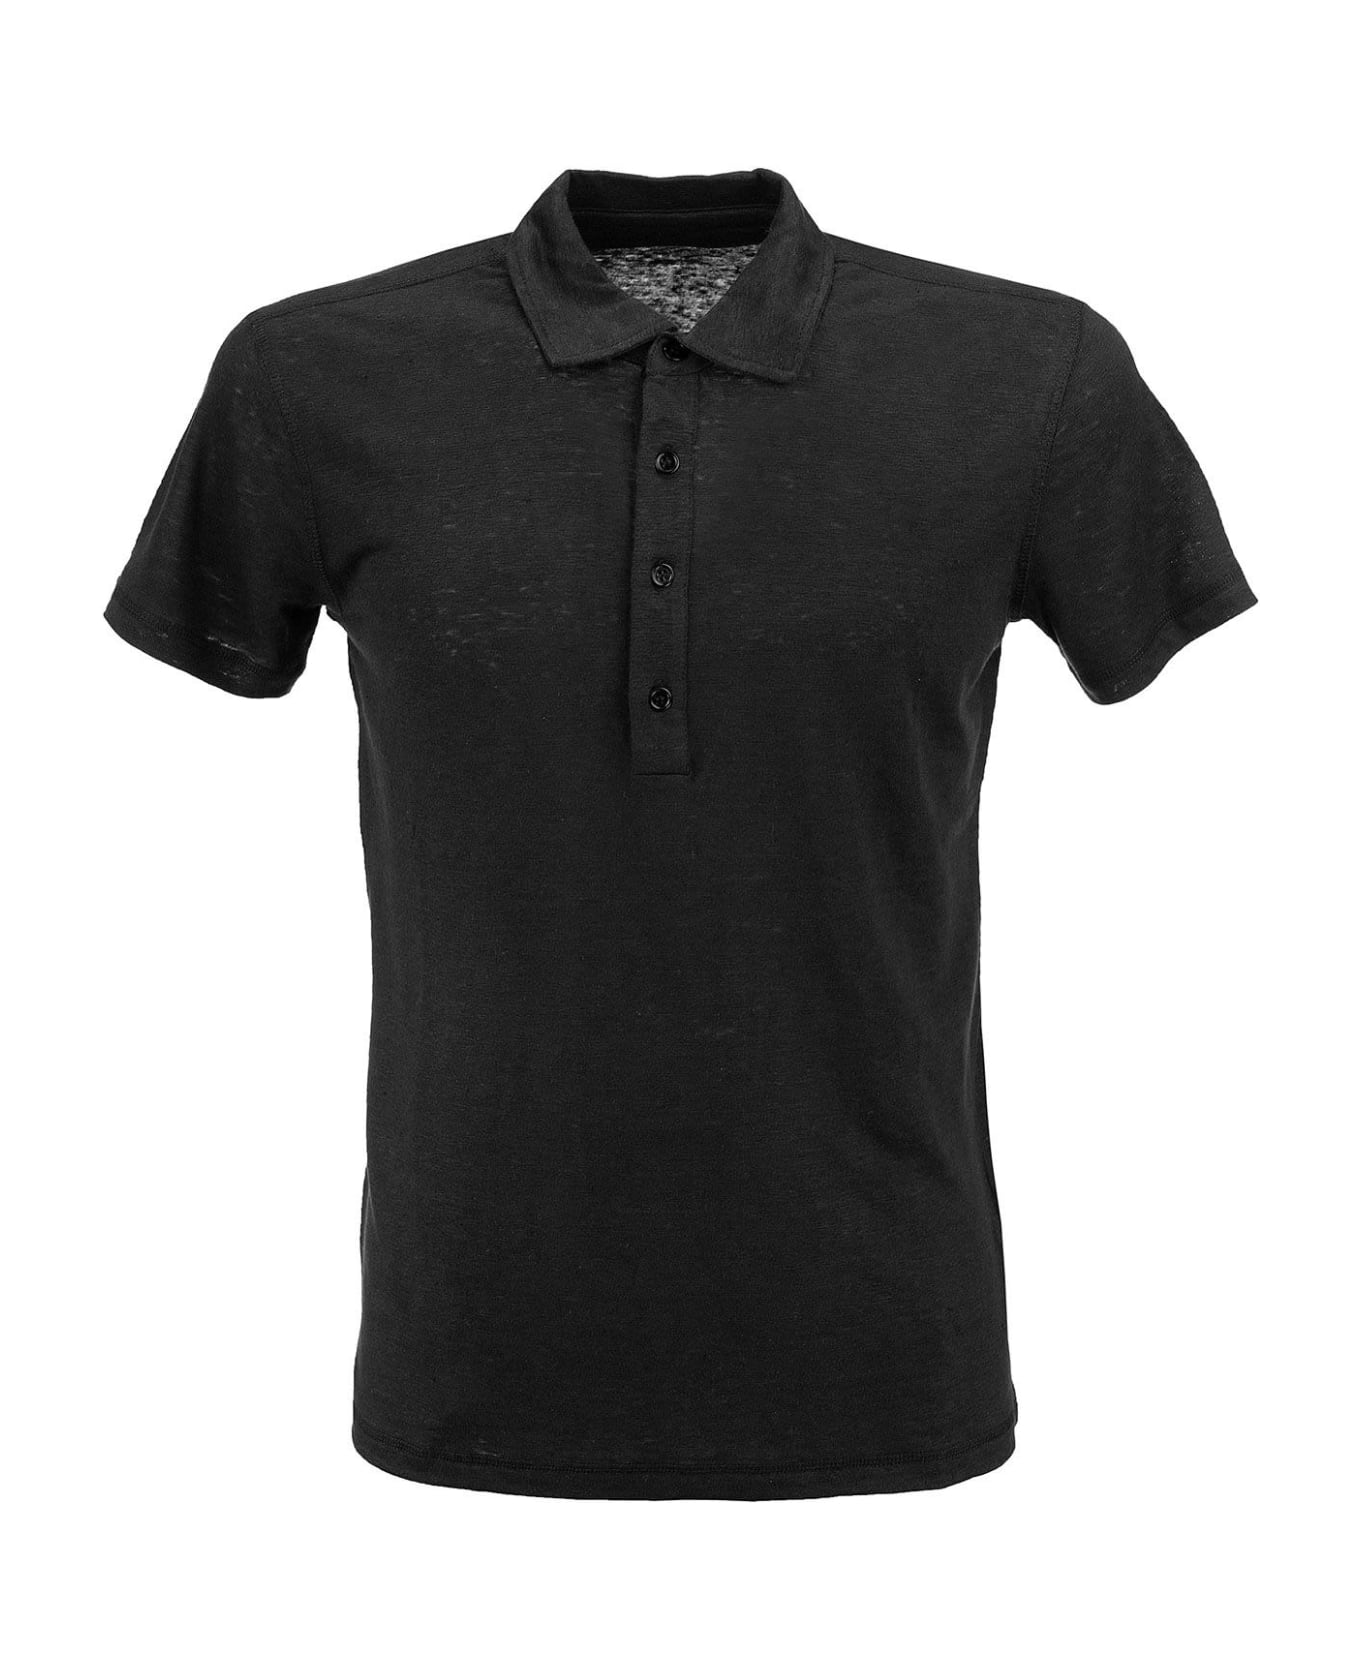 Majestic Filatures Linen Polo Shirt With Short Sleeves - Black